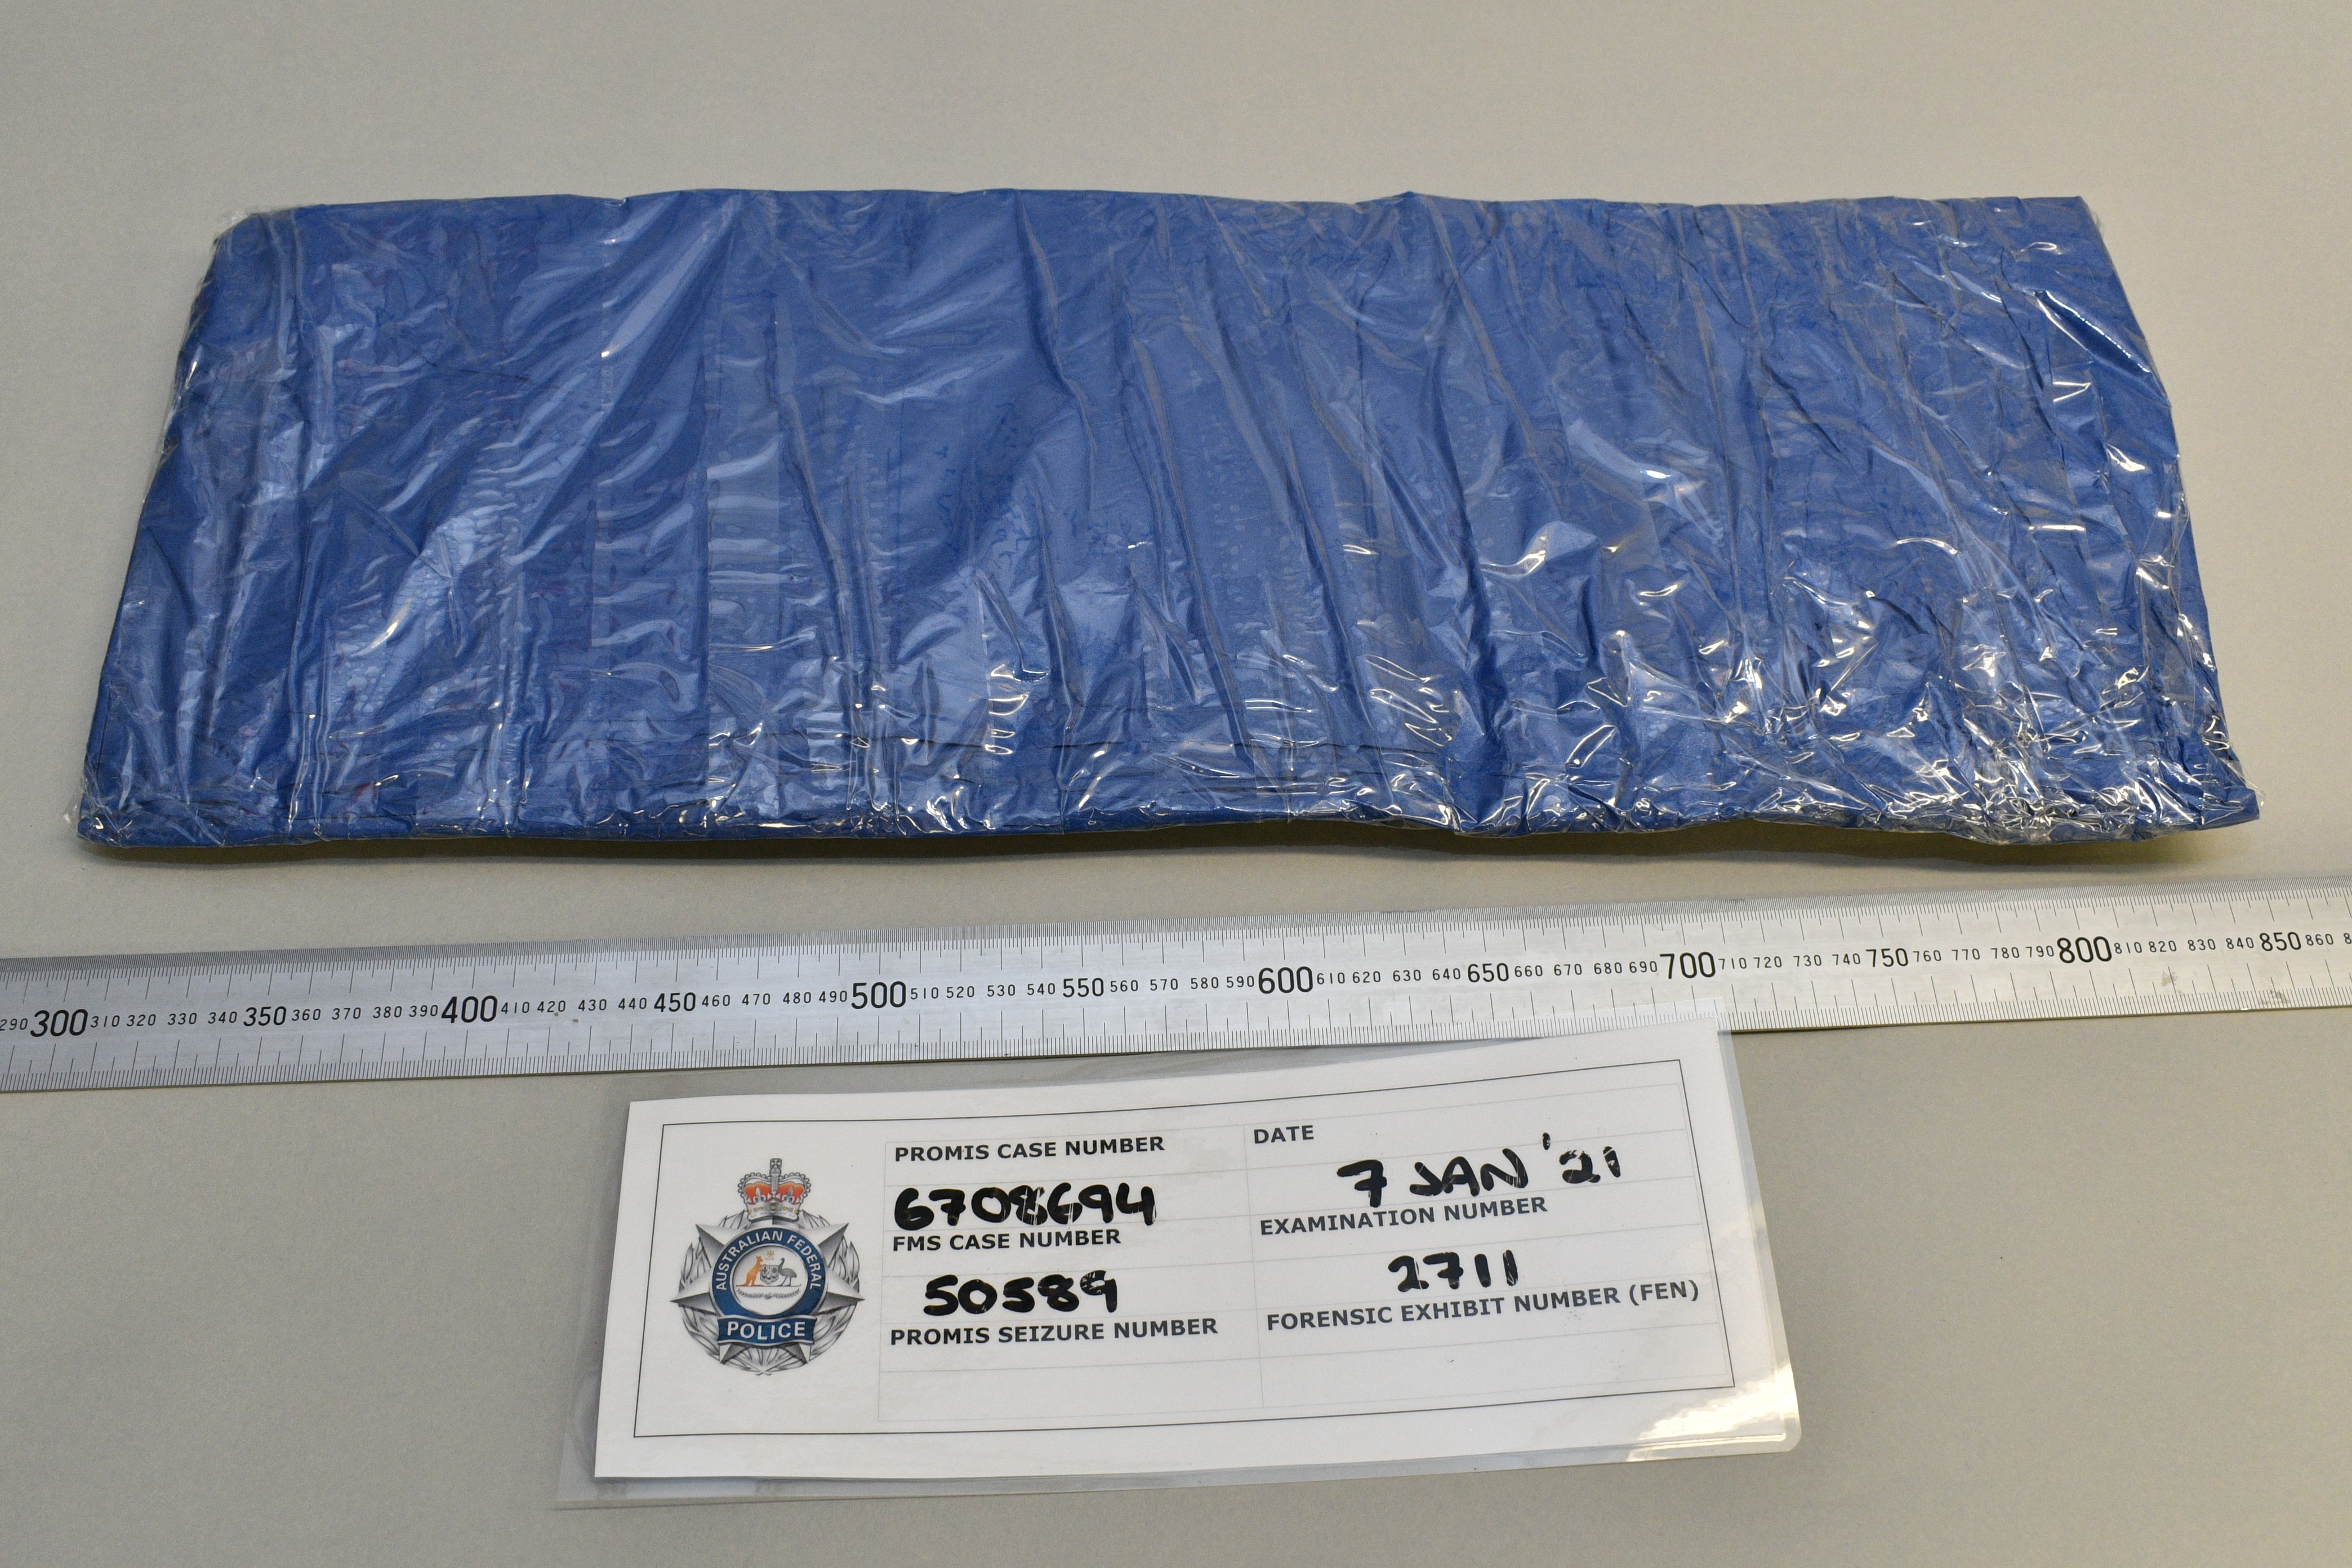 a total of 81 packages wrapped in blue plastic containing 81kg of methamphetamine.